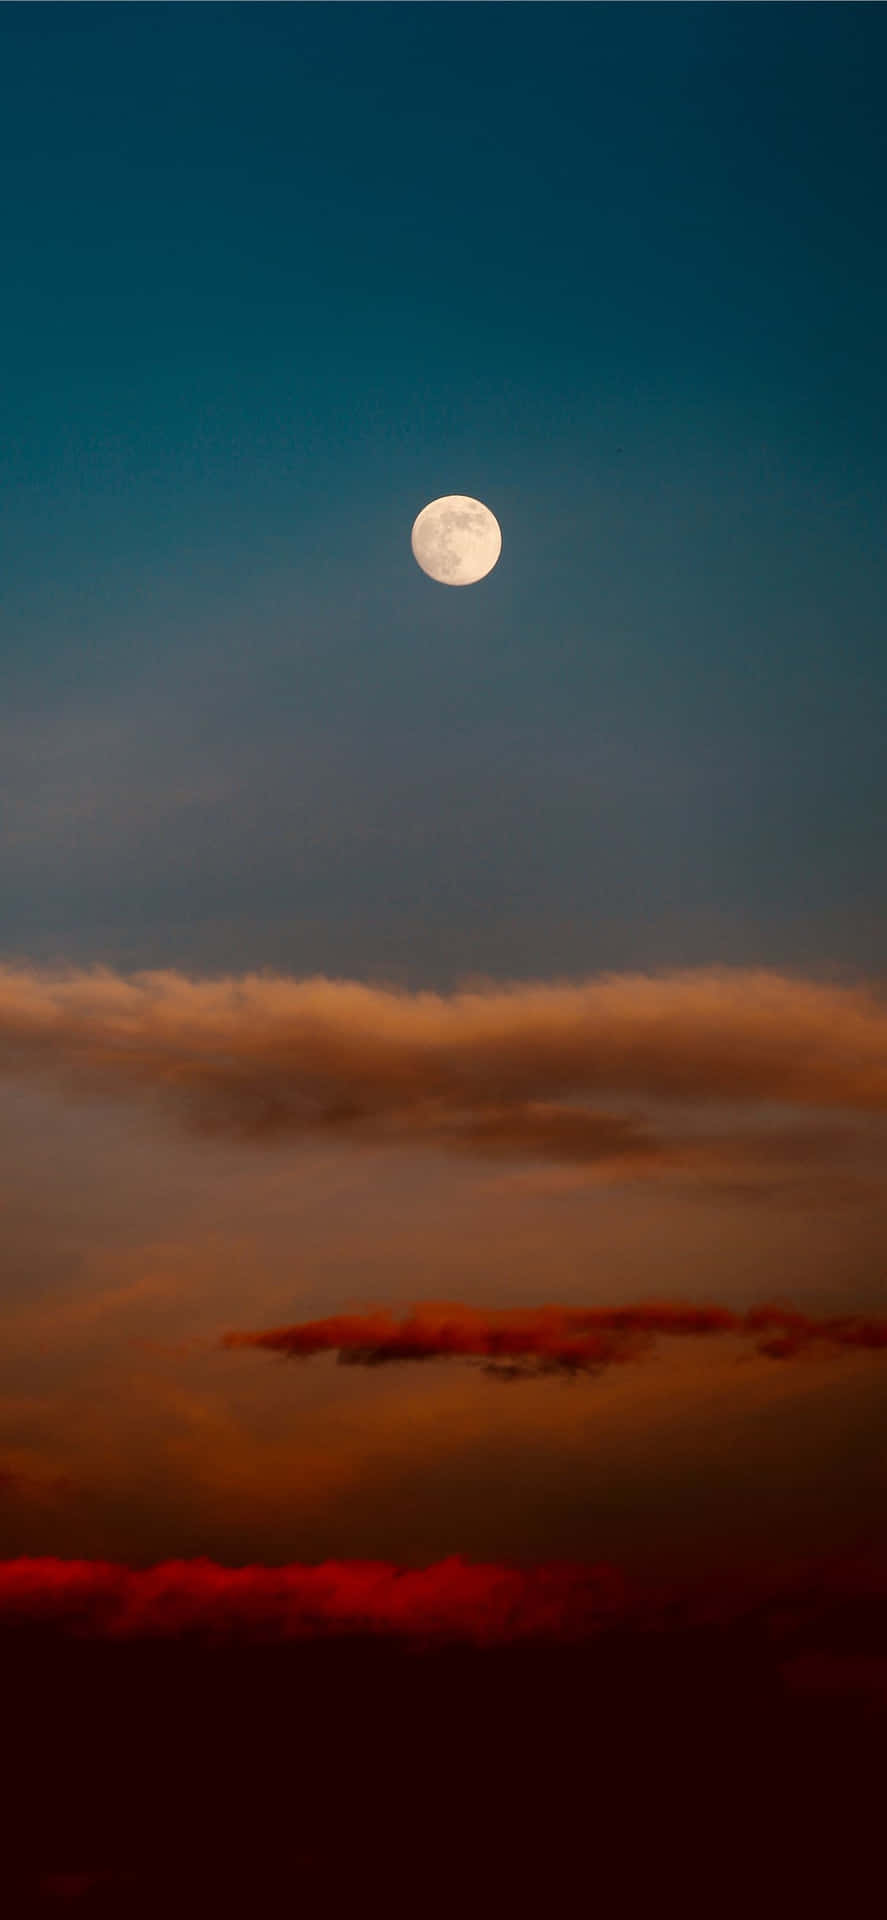 The Moon Is Seen In The Sky Above A Cloudy Sky